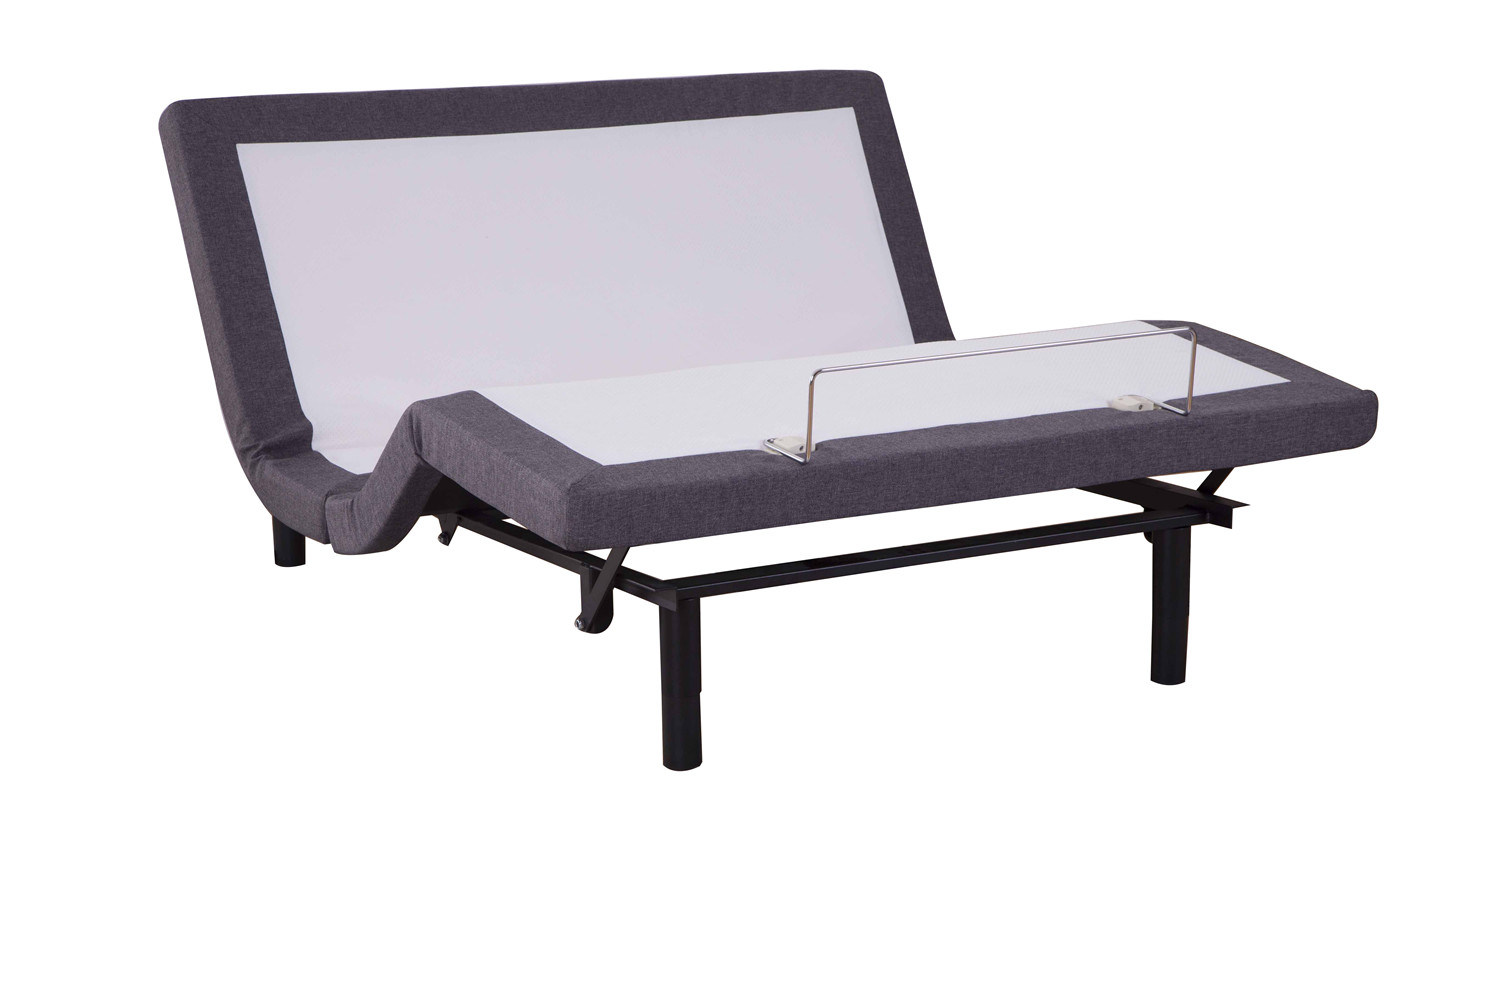 Adjustable Folding Massage Motor Bed with Remote as Single Twin Full Queen Size